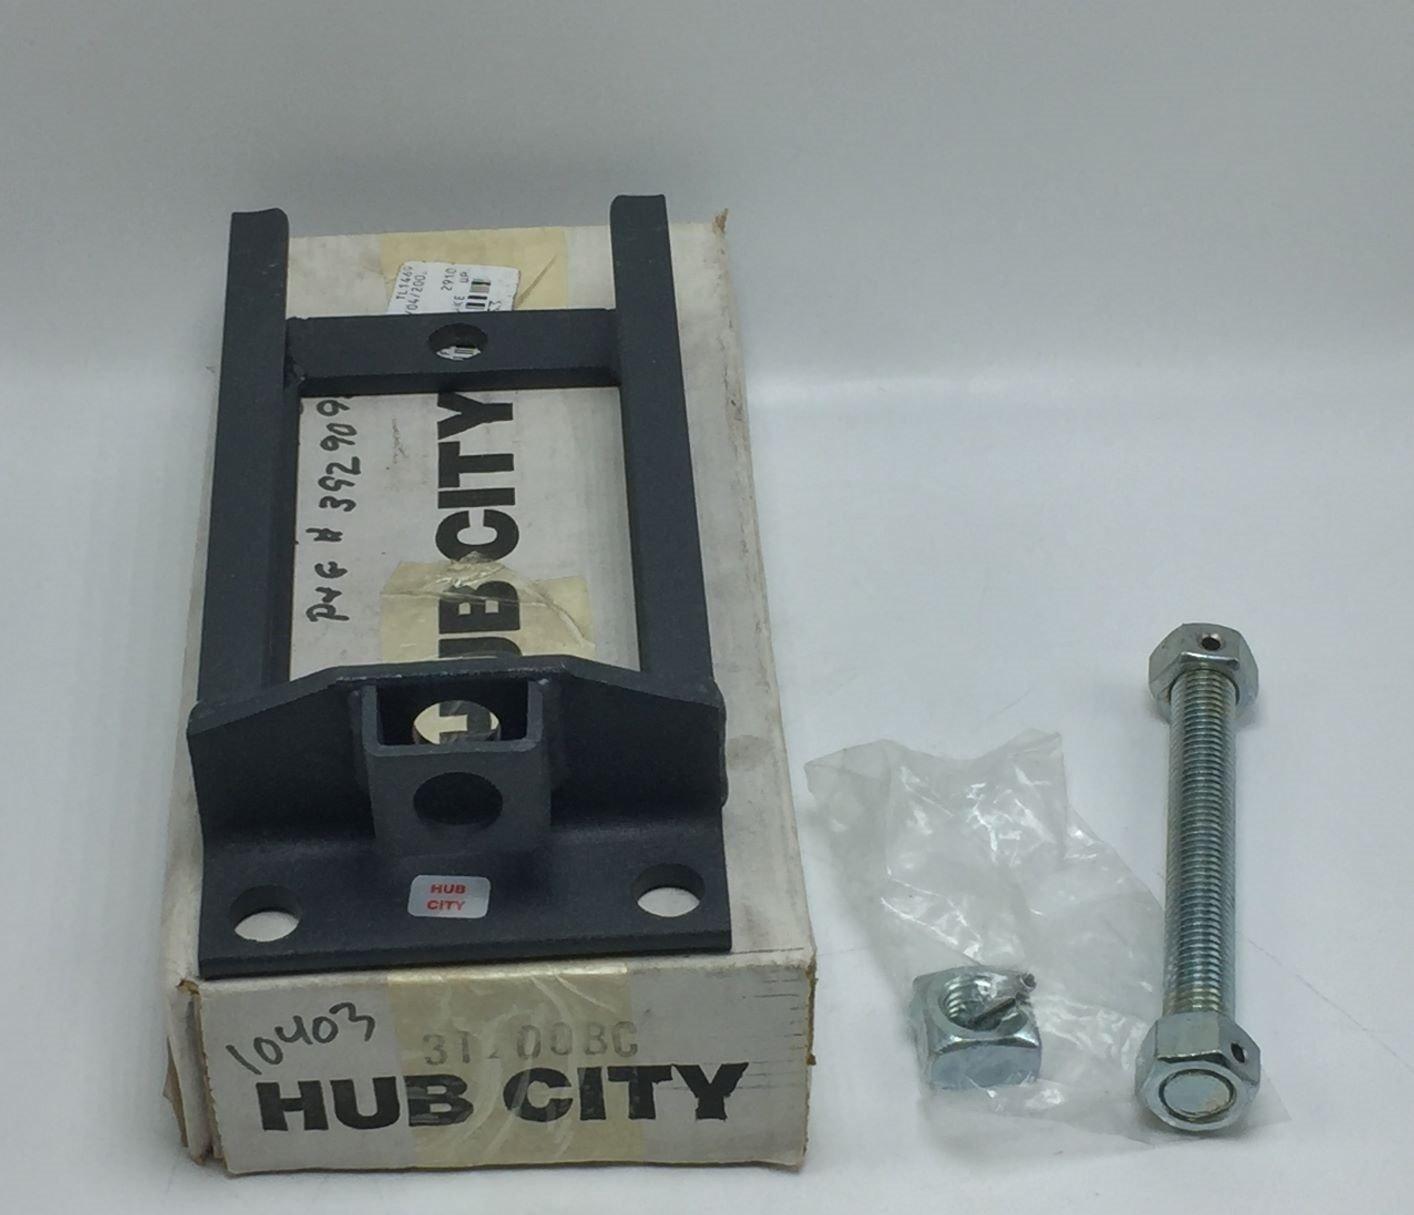 NEW HUB CITY 3T200BC Series T200 Side Mounted Take-up Frame, 3